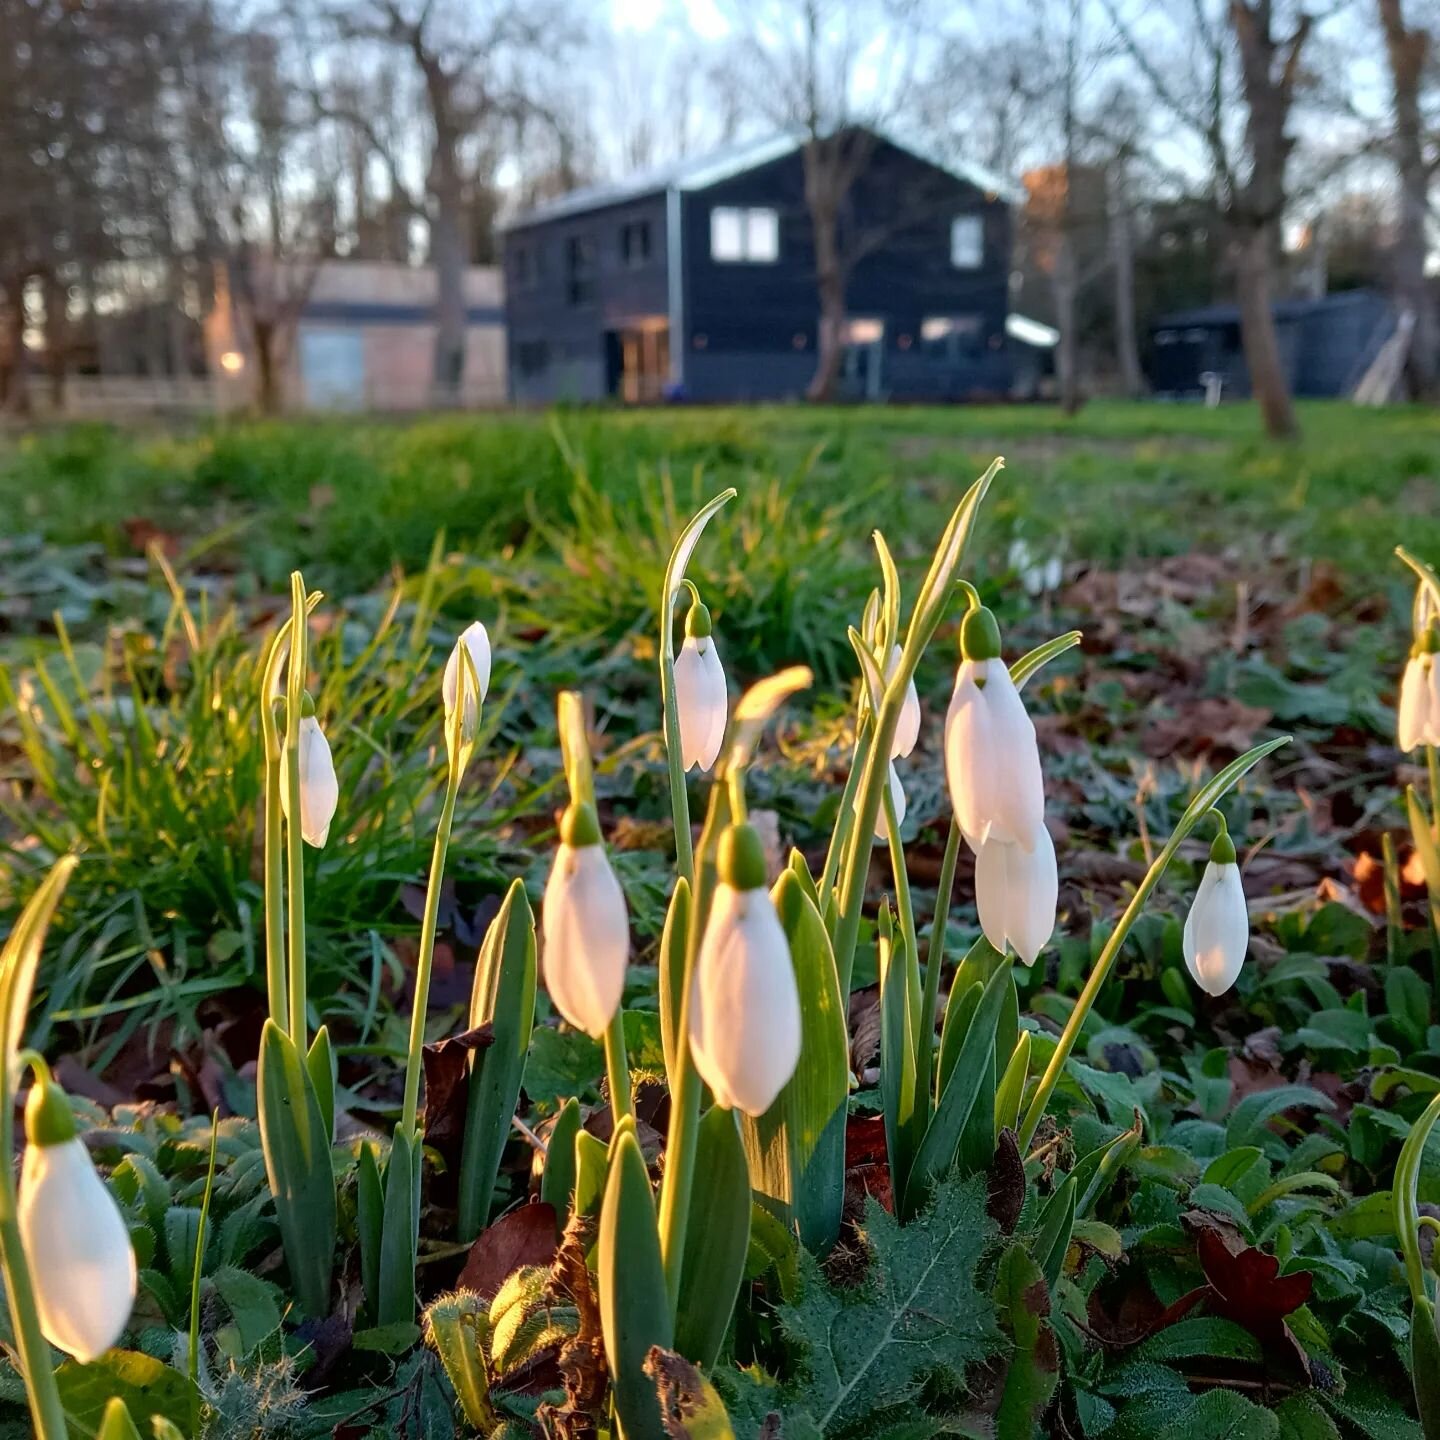 We have snowdrops flowering at Dunn's Barn.

#snowdrops #springiscoming #newhome #ourbeautifulhome #leistonsuffolk #suffolkcoast #lovesuffolk #ourblackbarn